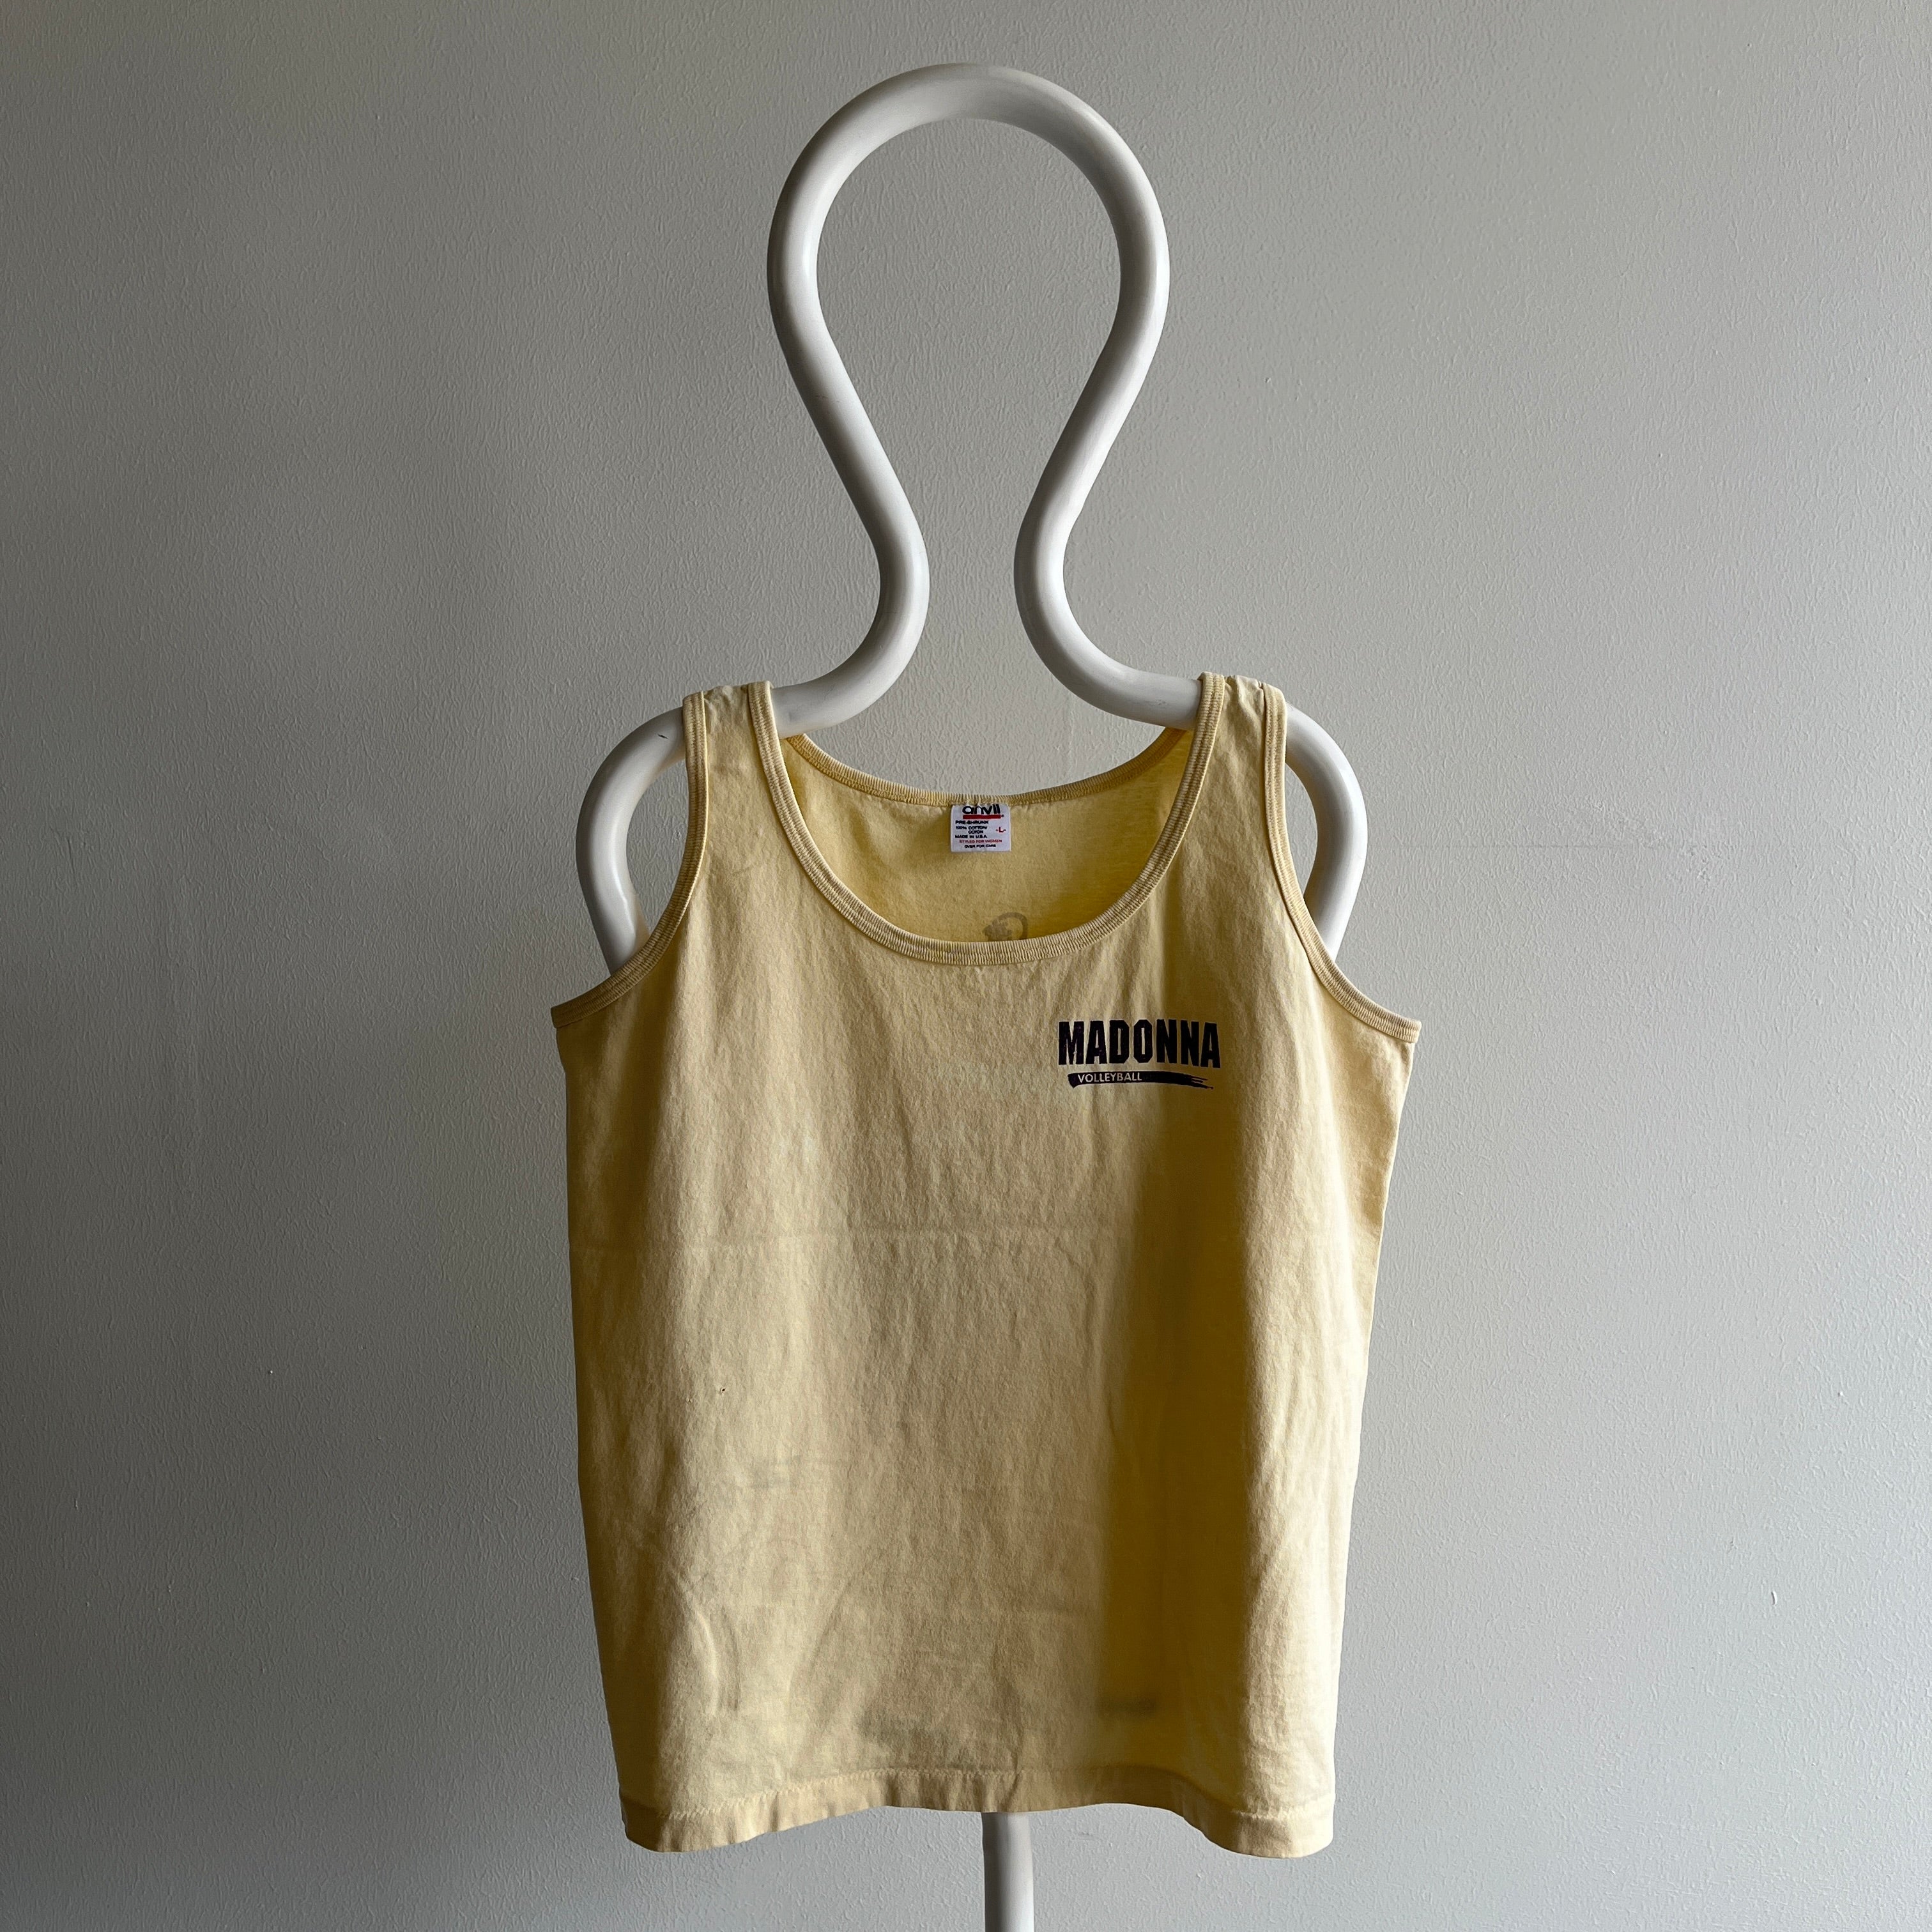 1990s Madonna Volleyball Cotton Tank Top by Anvil